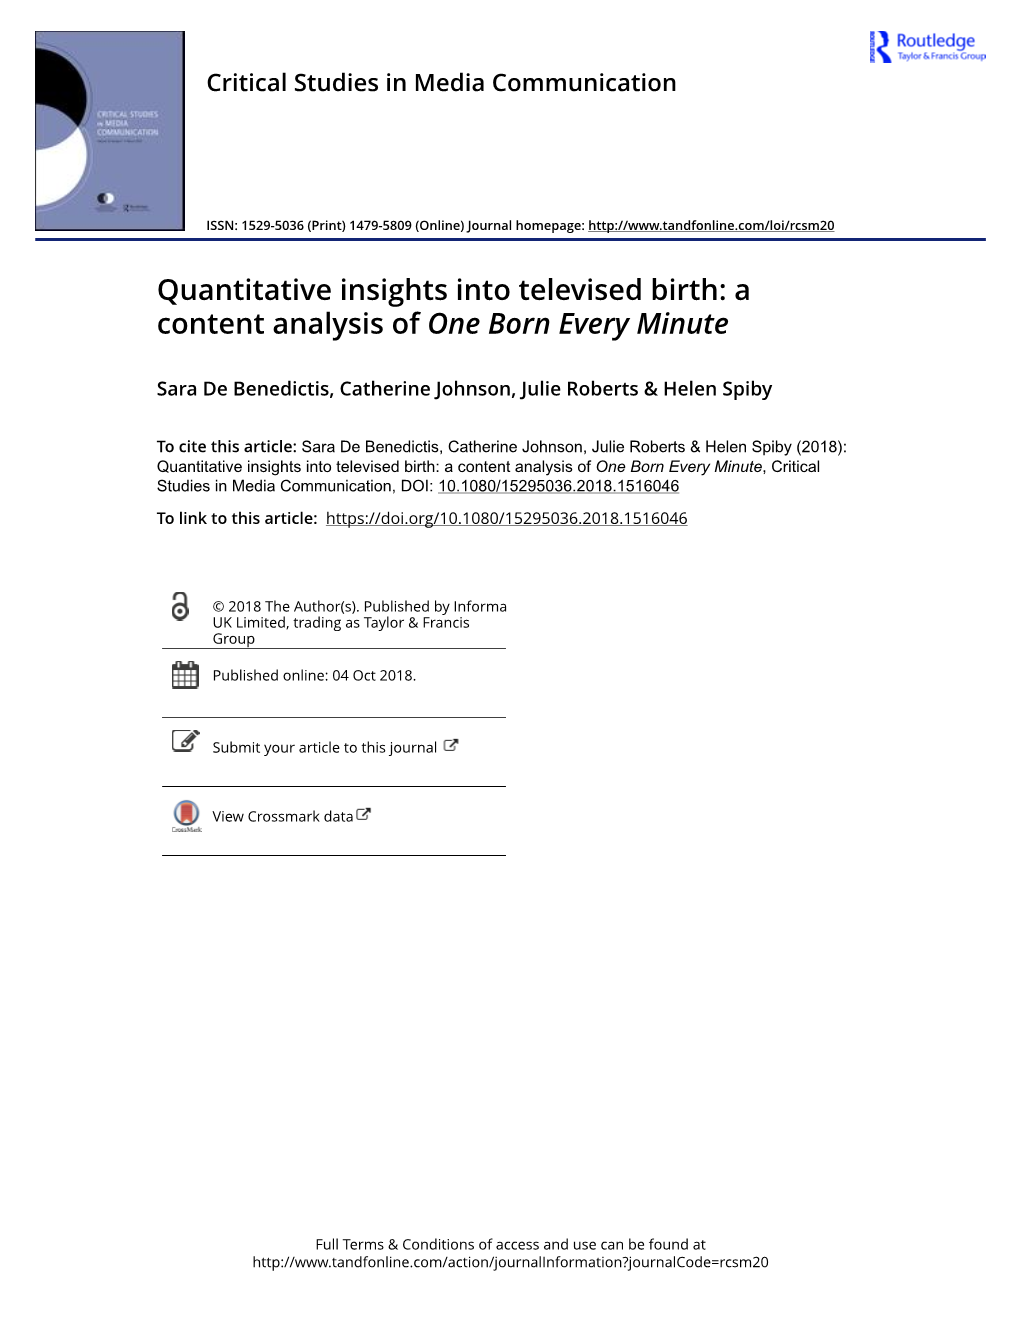 Quantitative Insights Into Televised Birth: a Content Analysis of One Born Every Minute